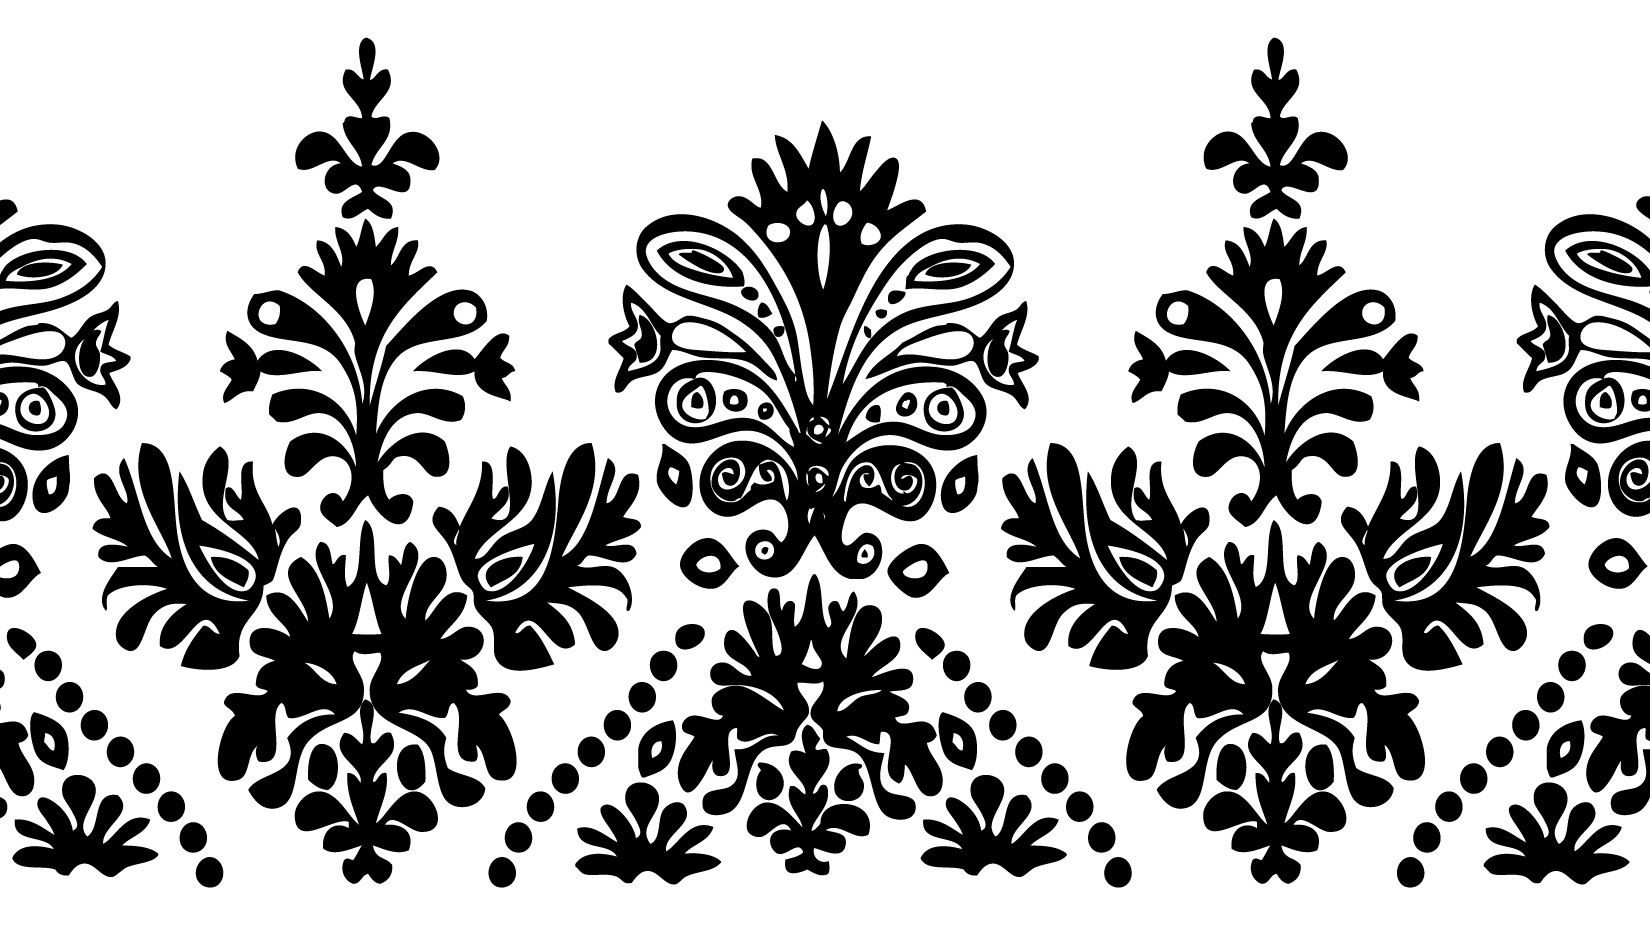 Free Printable Stencils For Painting | Stencils Designs Free - Free Printable Stencils For Painting